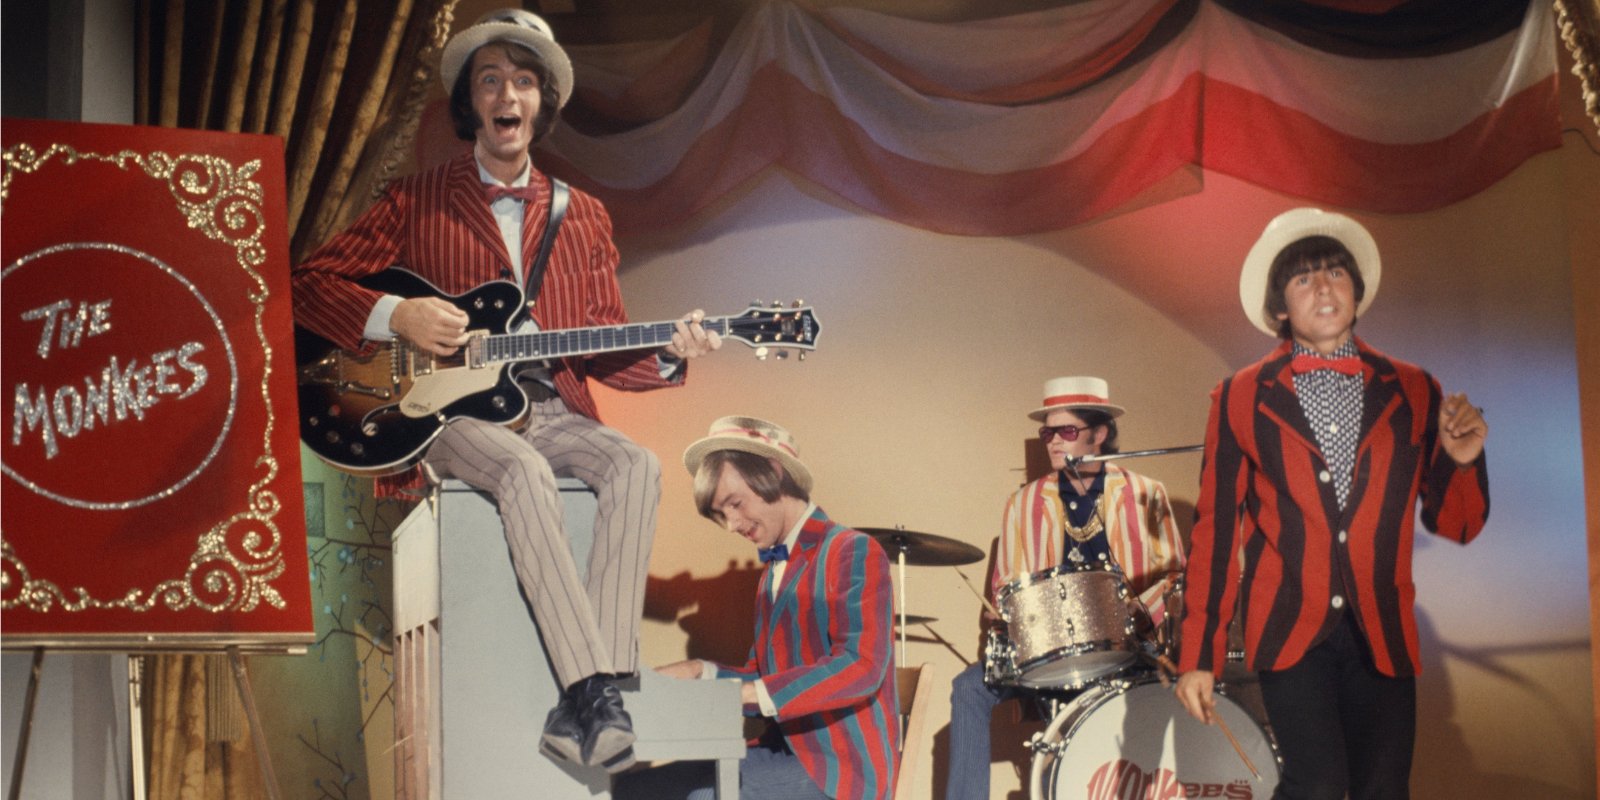 The Monkees cast includes Mike Nesmith, Peter Tork, Micky Dolenz, and Davy Jones.